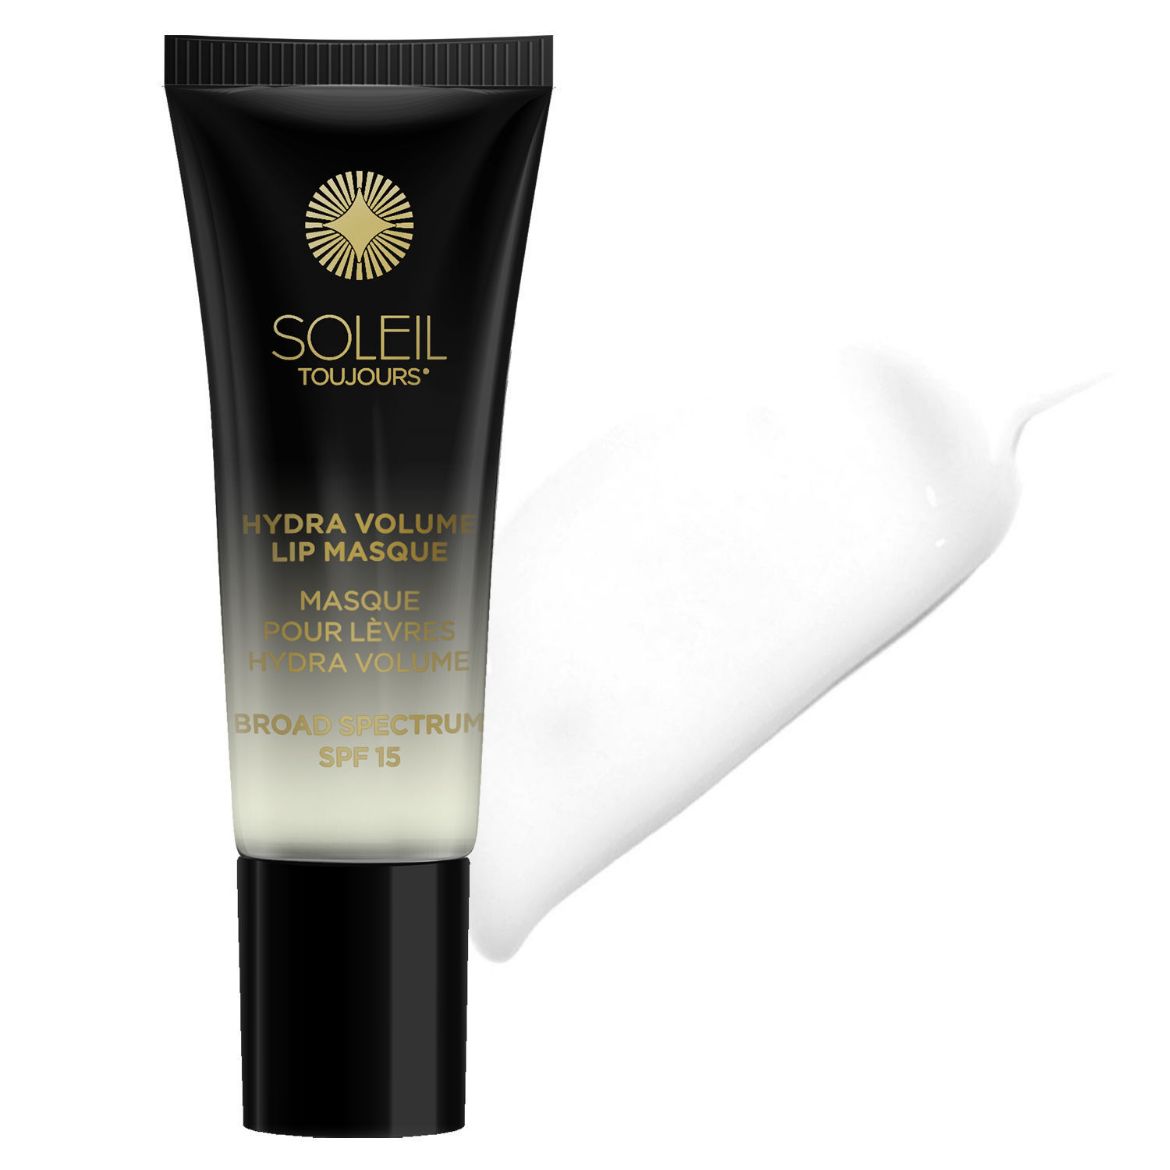 Image of Soleil Toujours Mineral Hydra Volume Lip Masque SPF 15 - Cloud Nine (10ml)